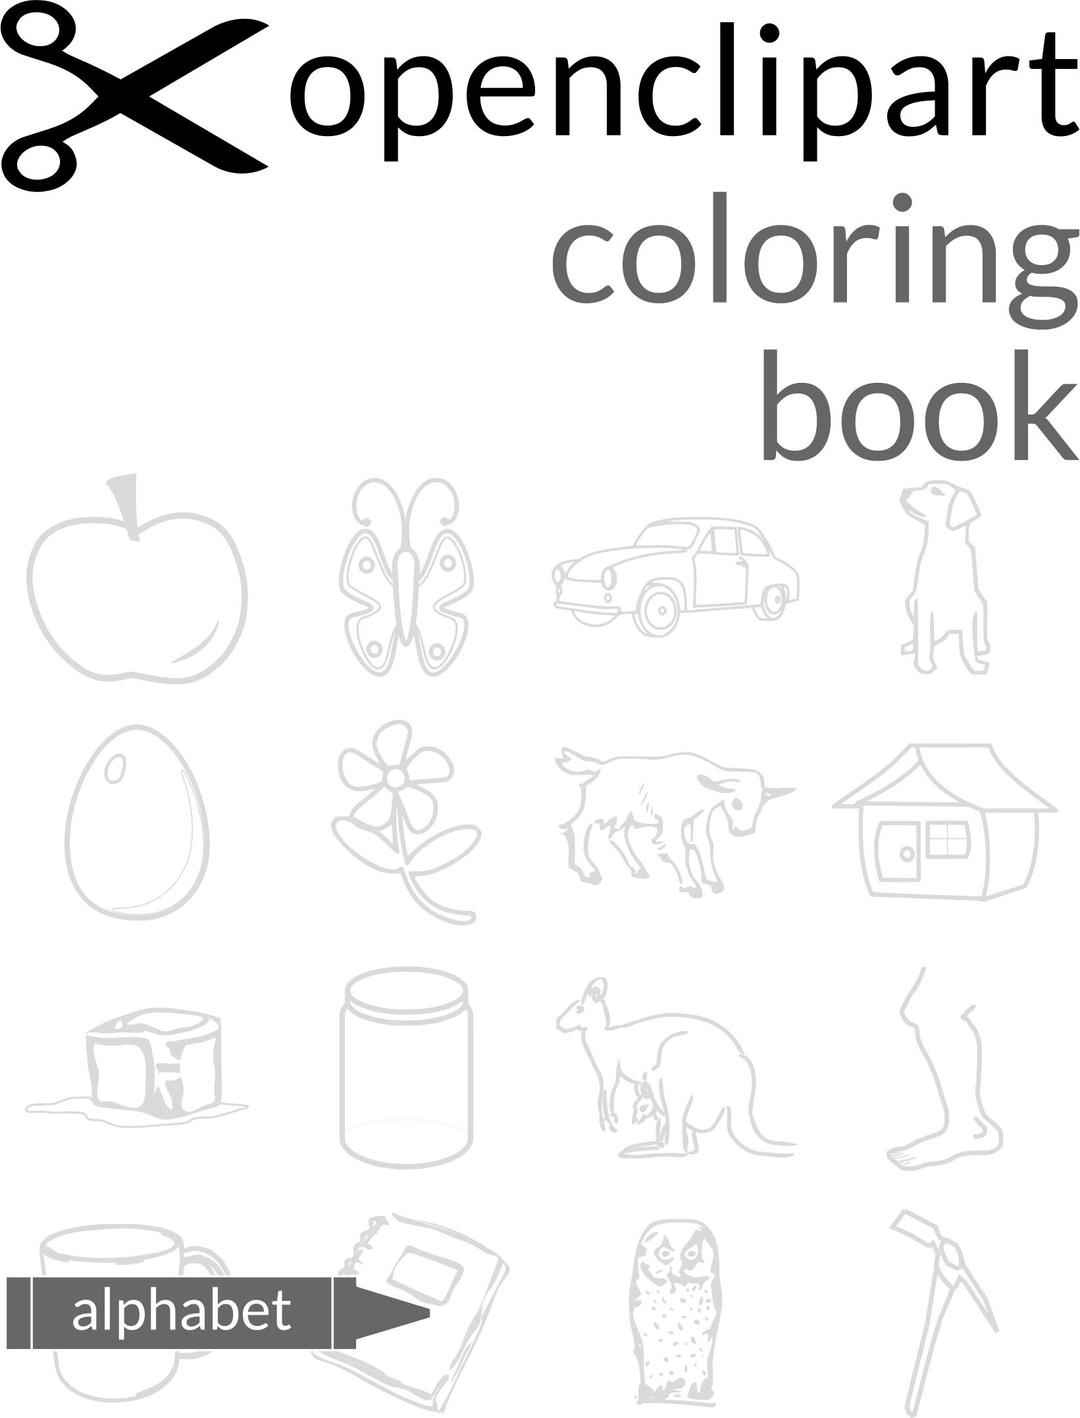 NEW: Openclipart Coloring Books Alphabet Released. Download for FREE. png transparent